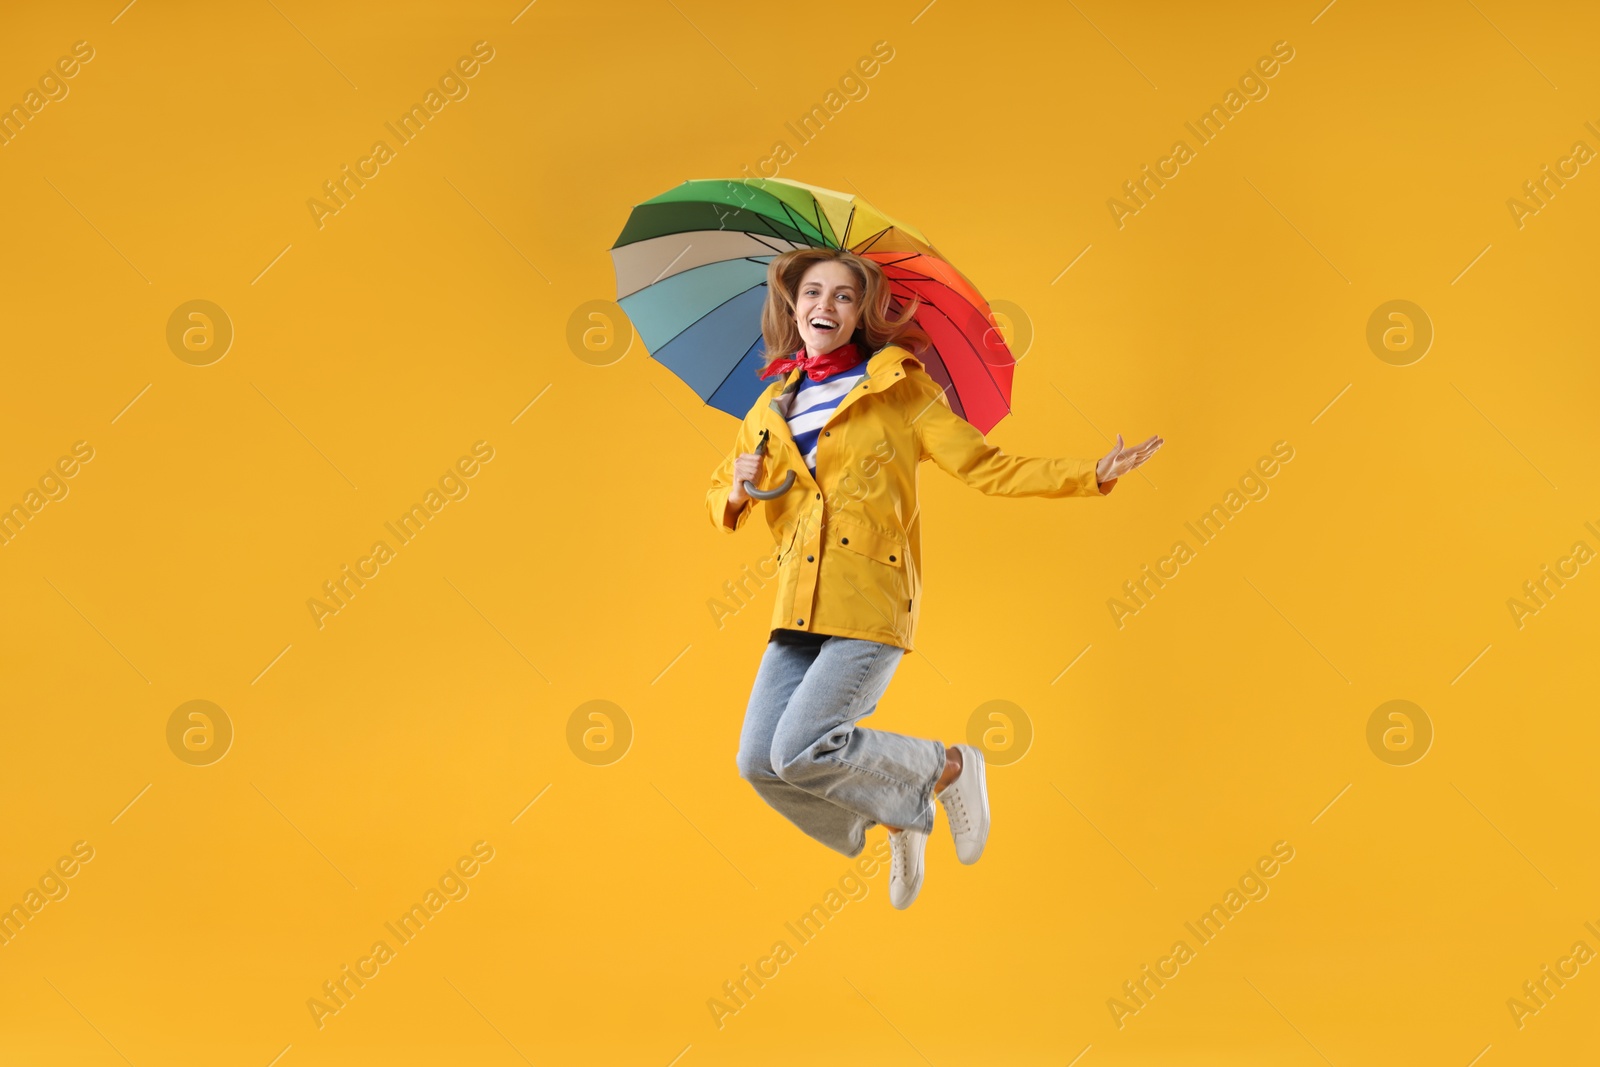 Photo of Woman with colorful umbrella jumping on yellow background